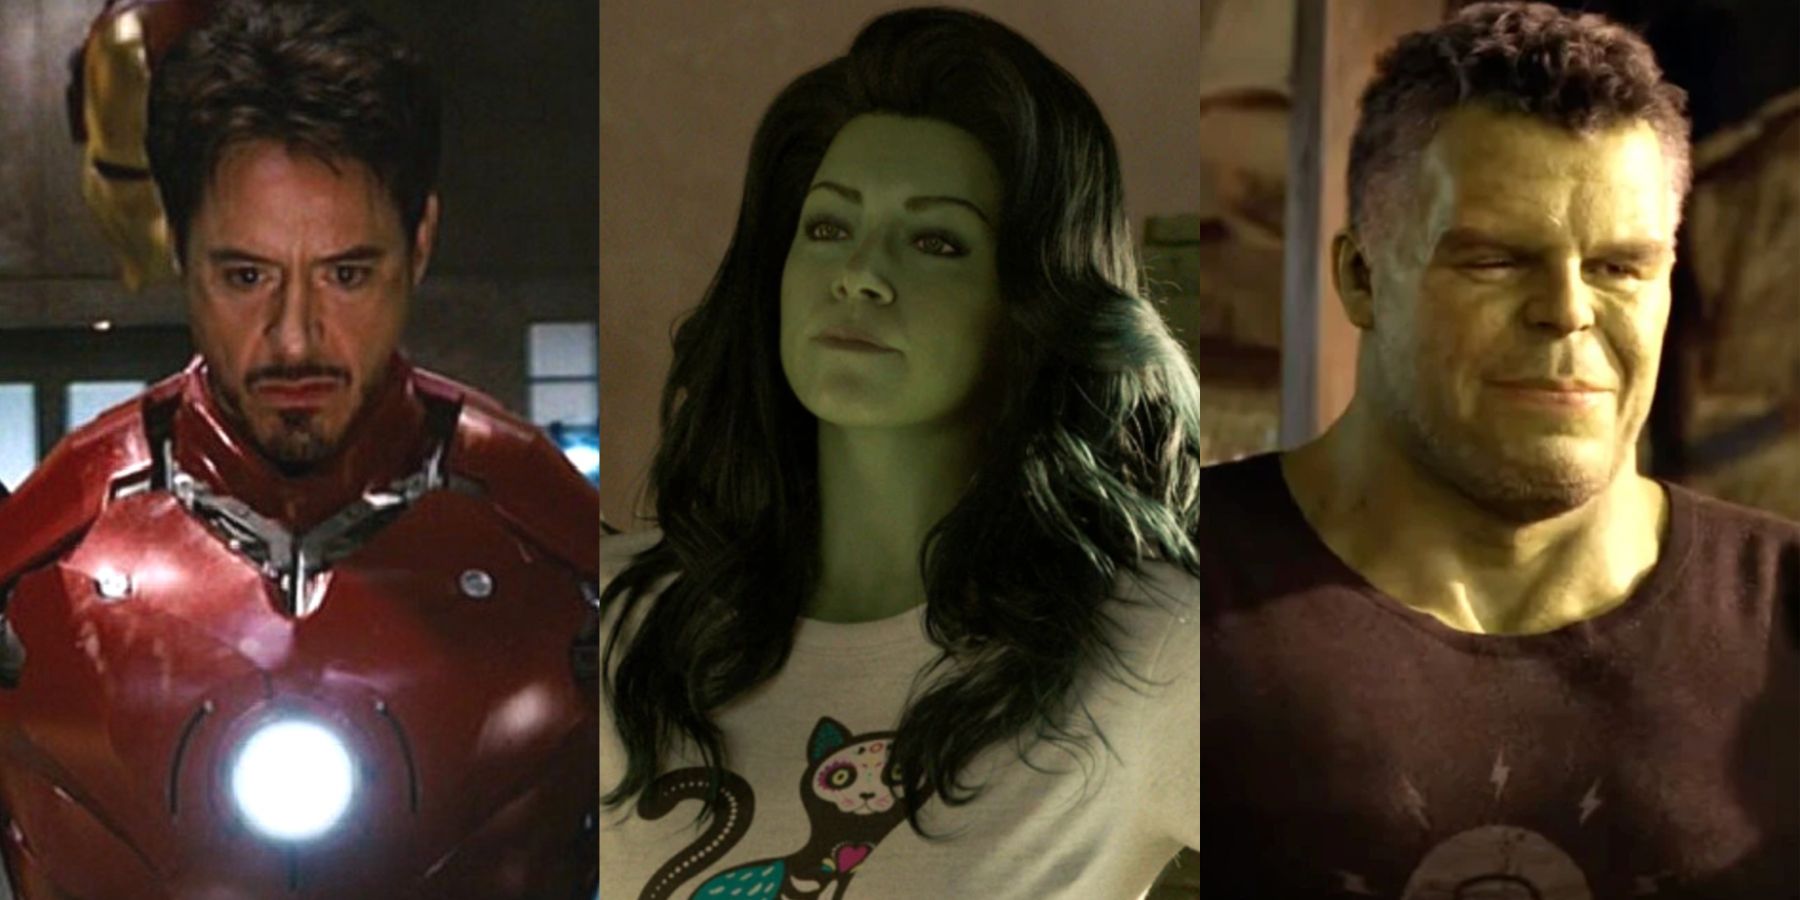 A split image features the MCU version of Iron Man, She-Hulk, and Hulk